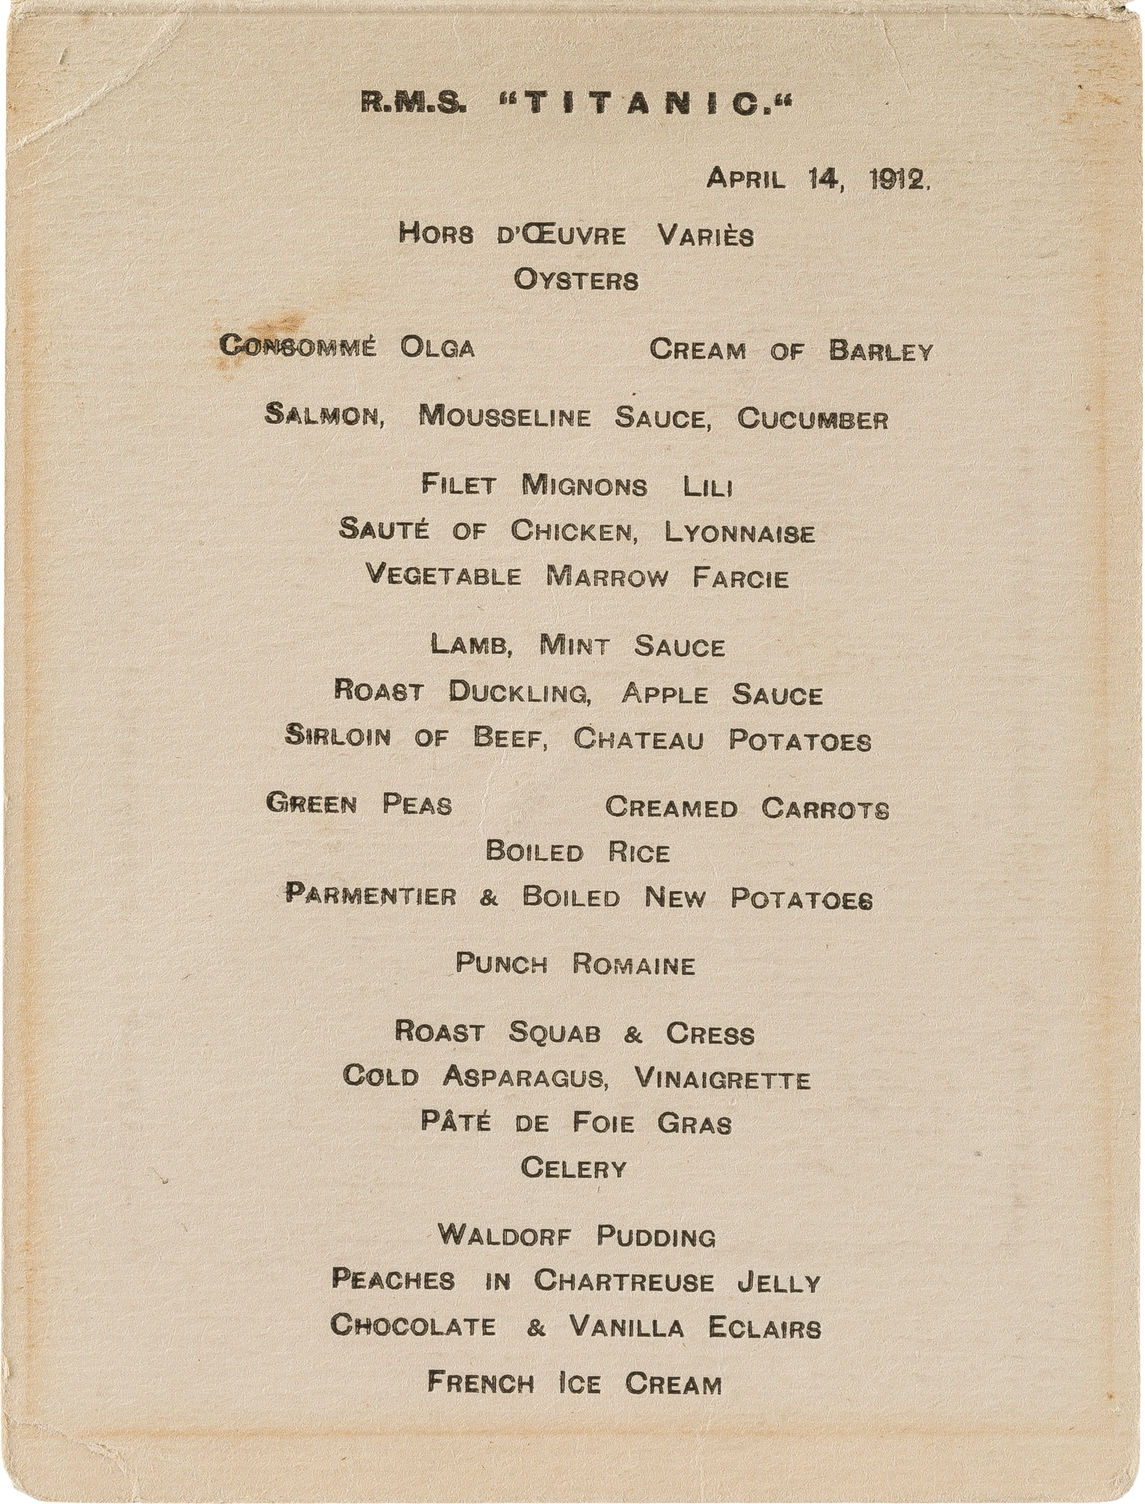 Dinner menu from the R.M.S. Titanic from 14 April 1912, the night before it famously struck the fatal iceberg